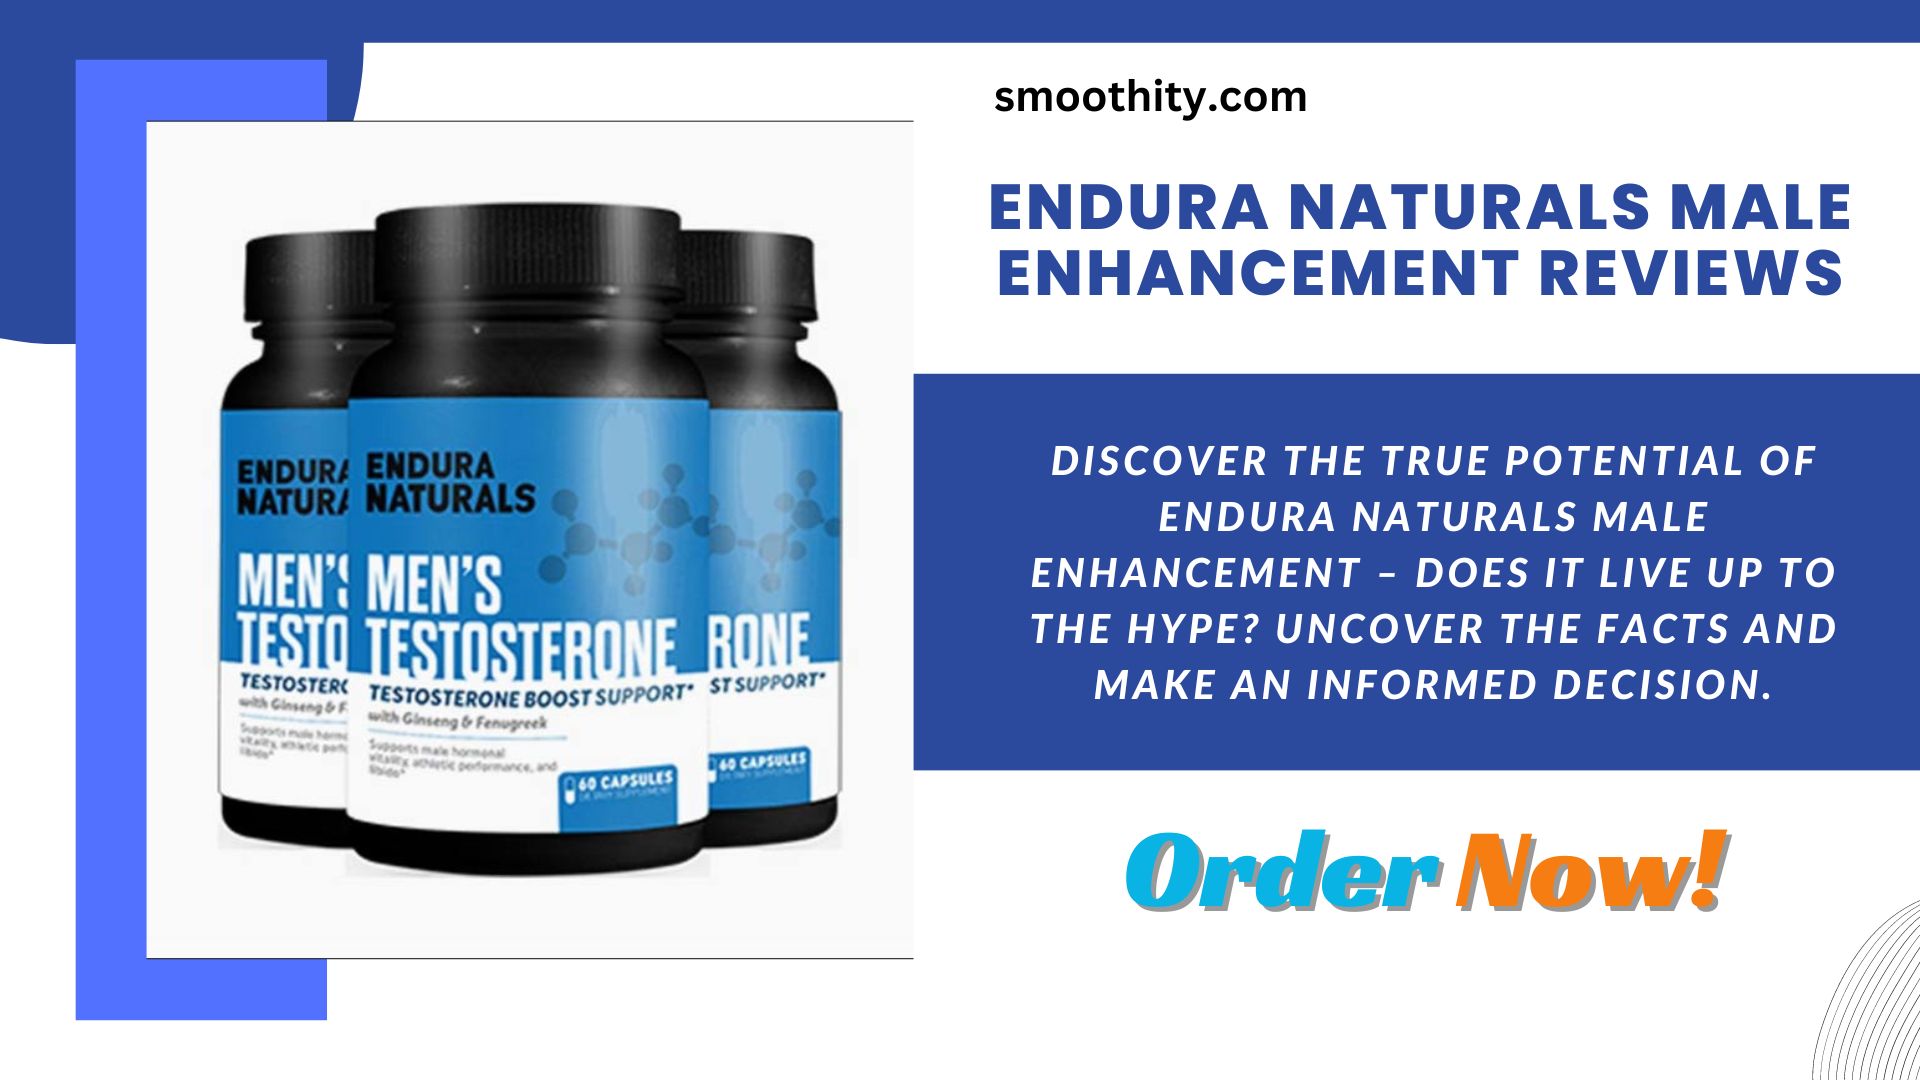 Endura Naturals Male Enhancement Reviews – Does It Work What They Won’t Tell You!